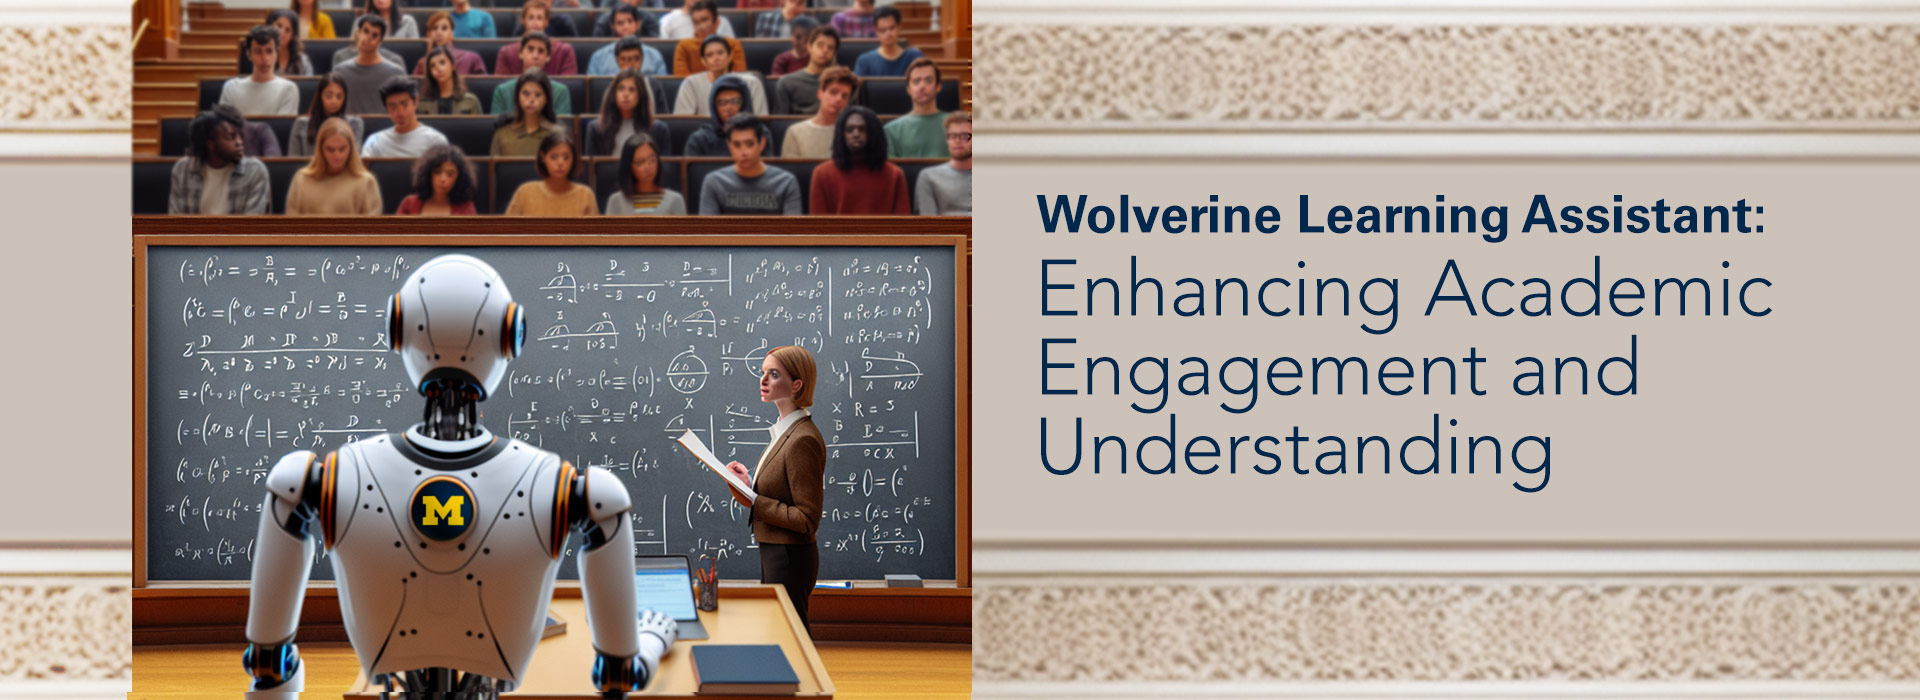 Wolverine Learning Assistant: Enhancing Academic Engagement and Understanding